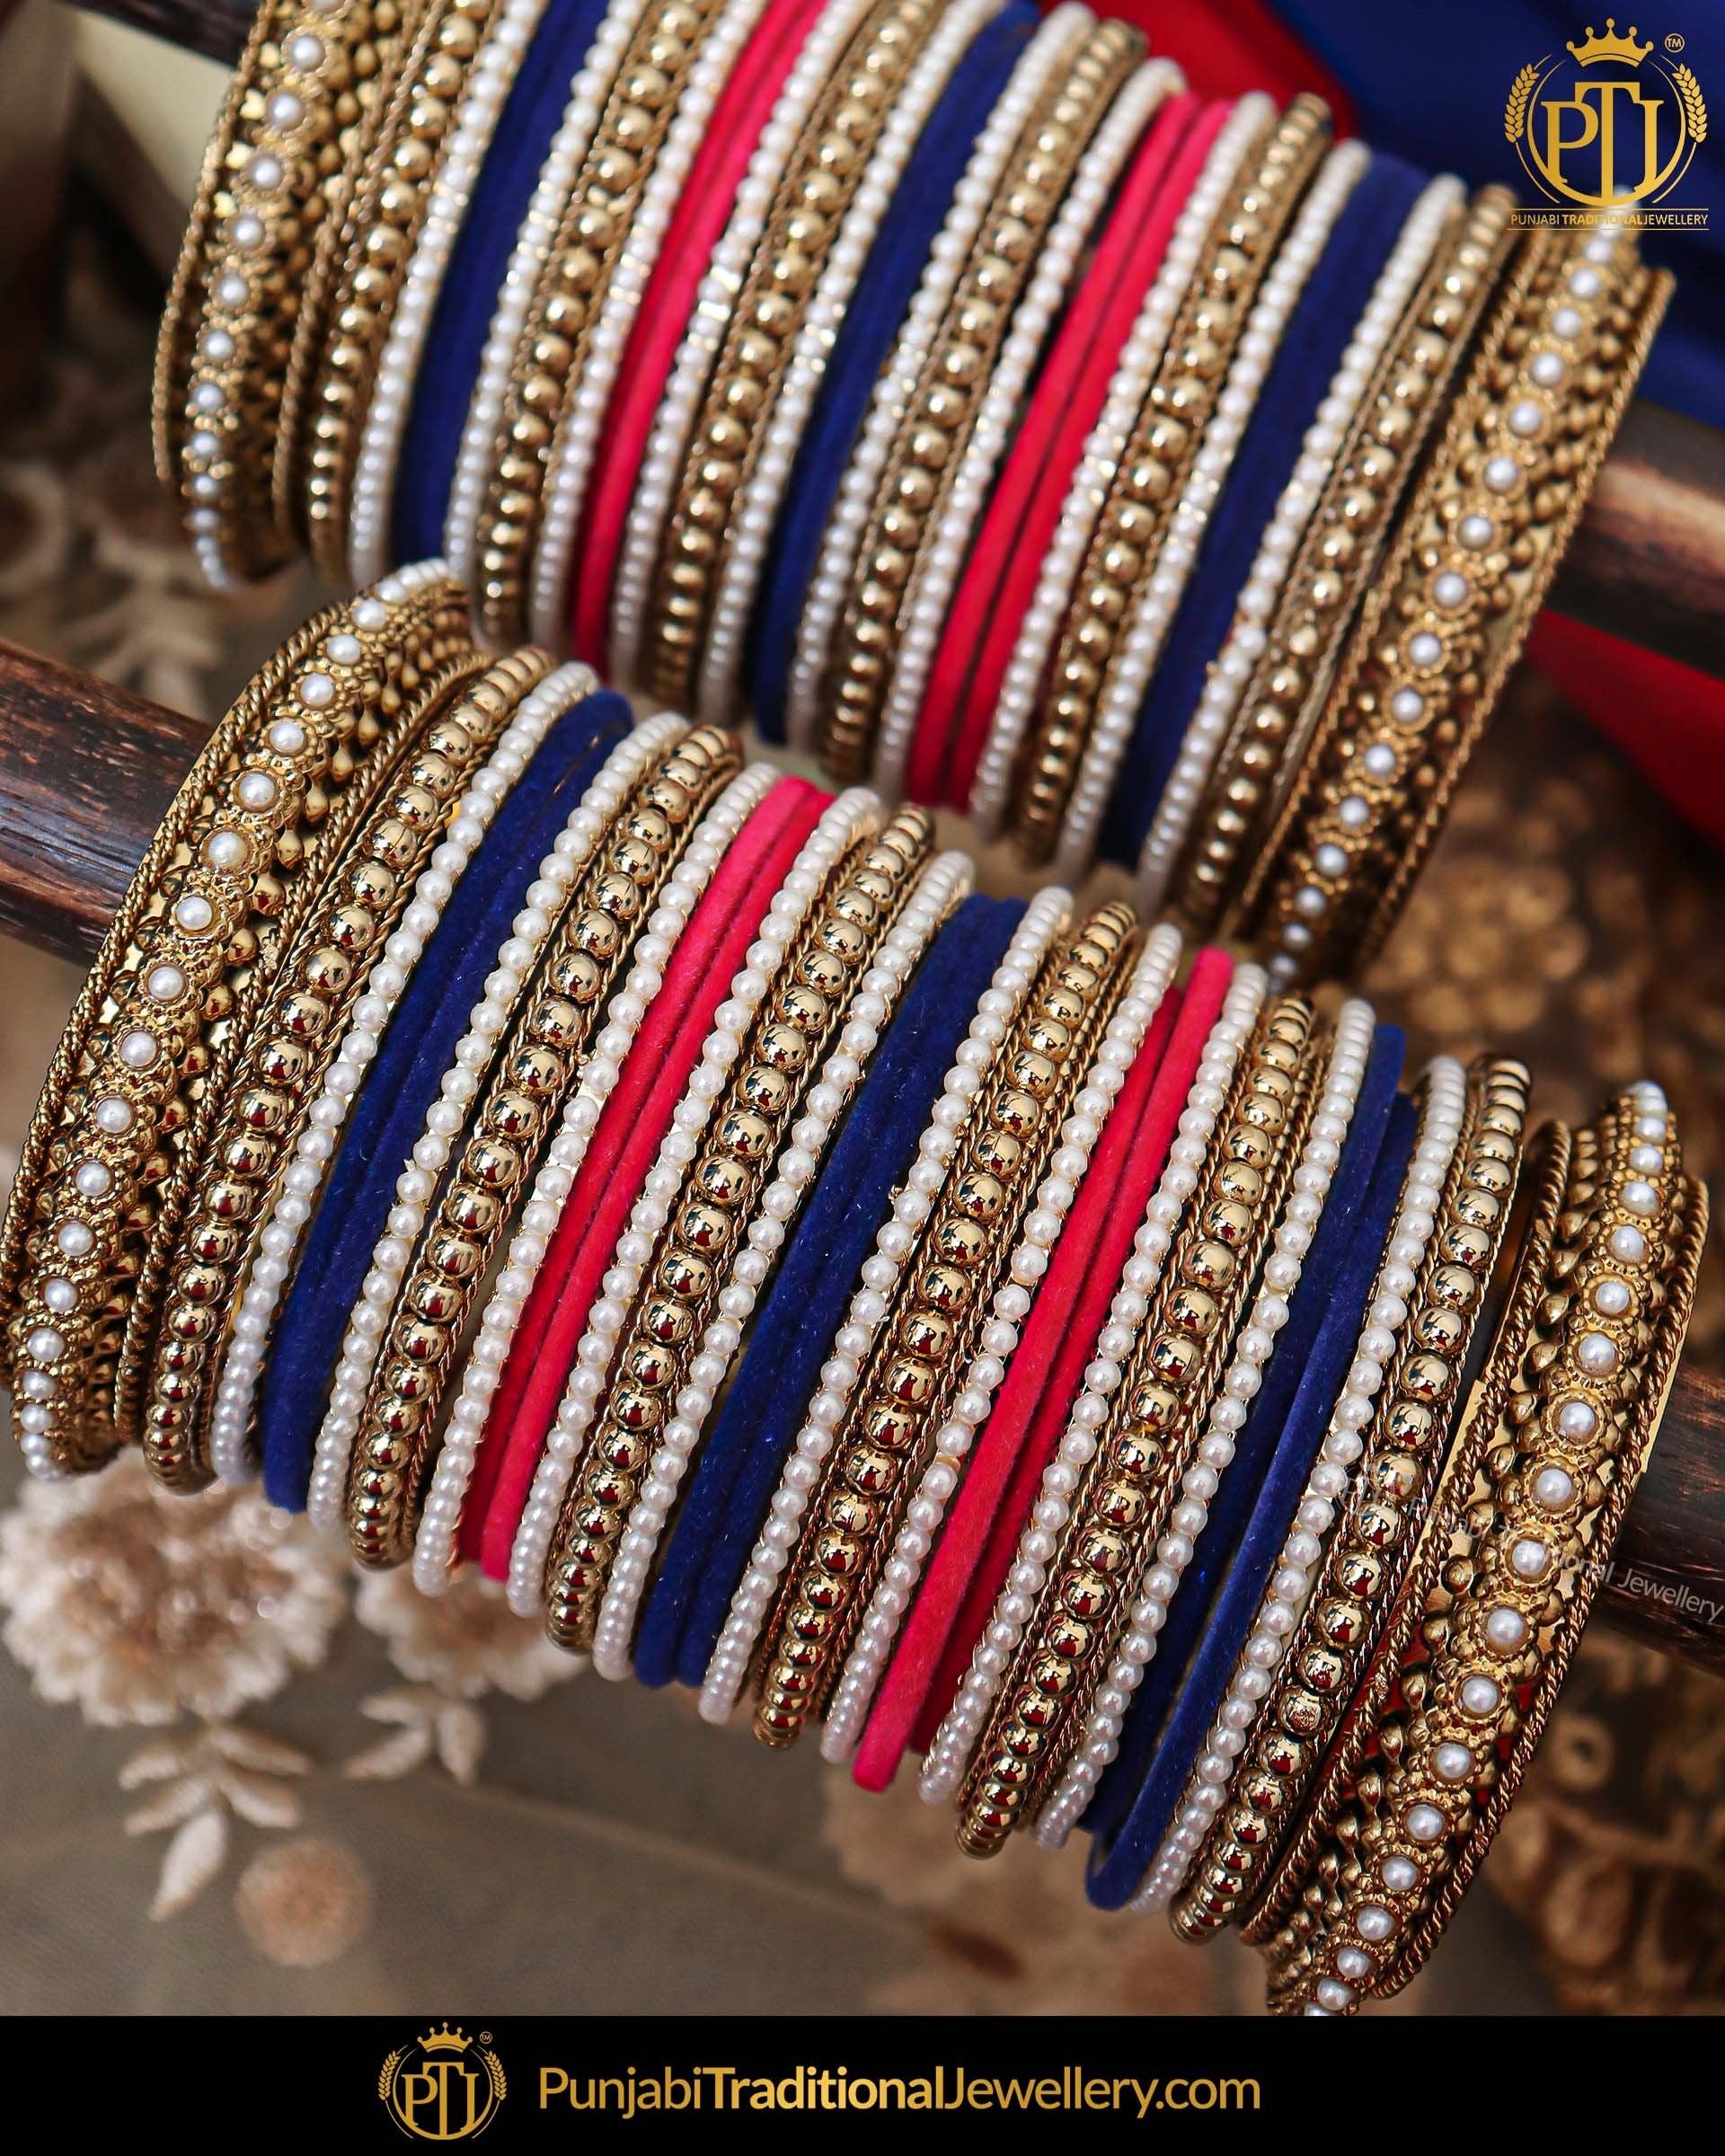 Antique Gold Multi Pearl Bangles Set For Both Hands | Punjabi Traditional Jewellery Exclusive